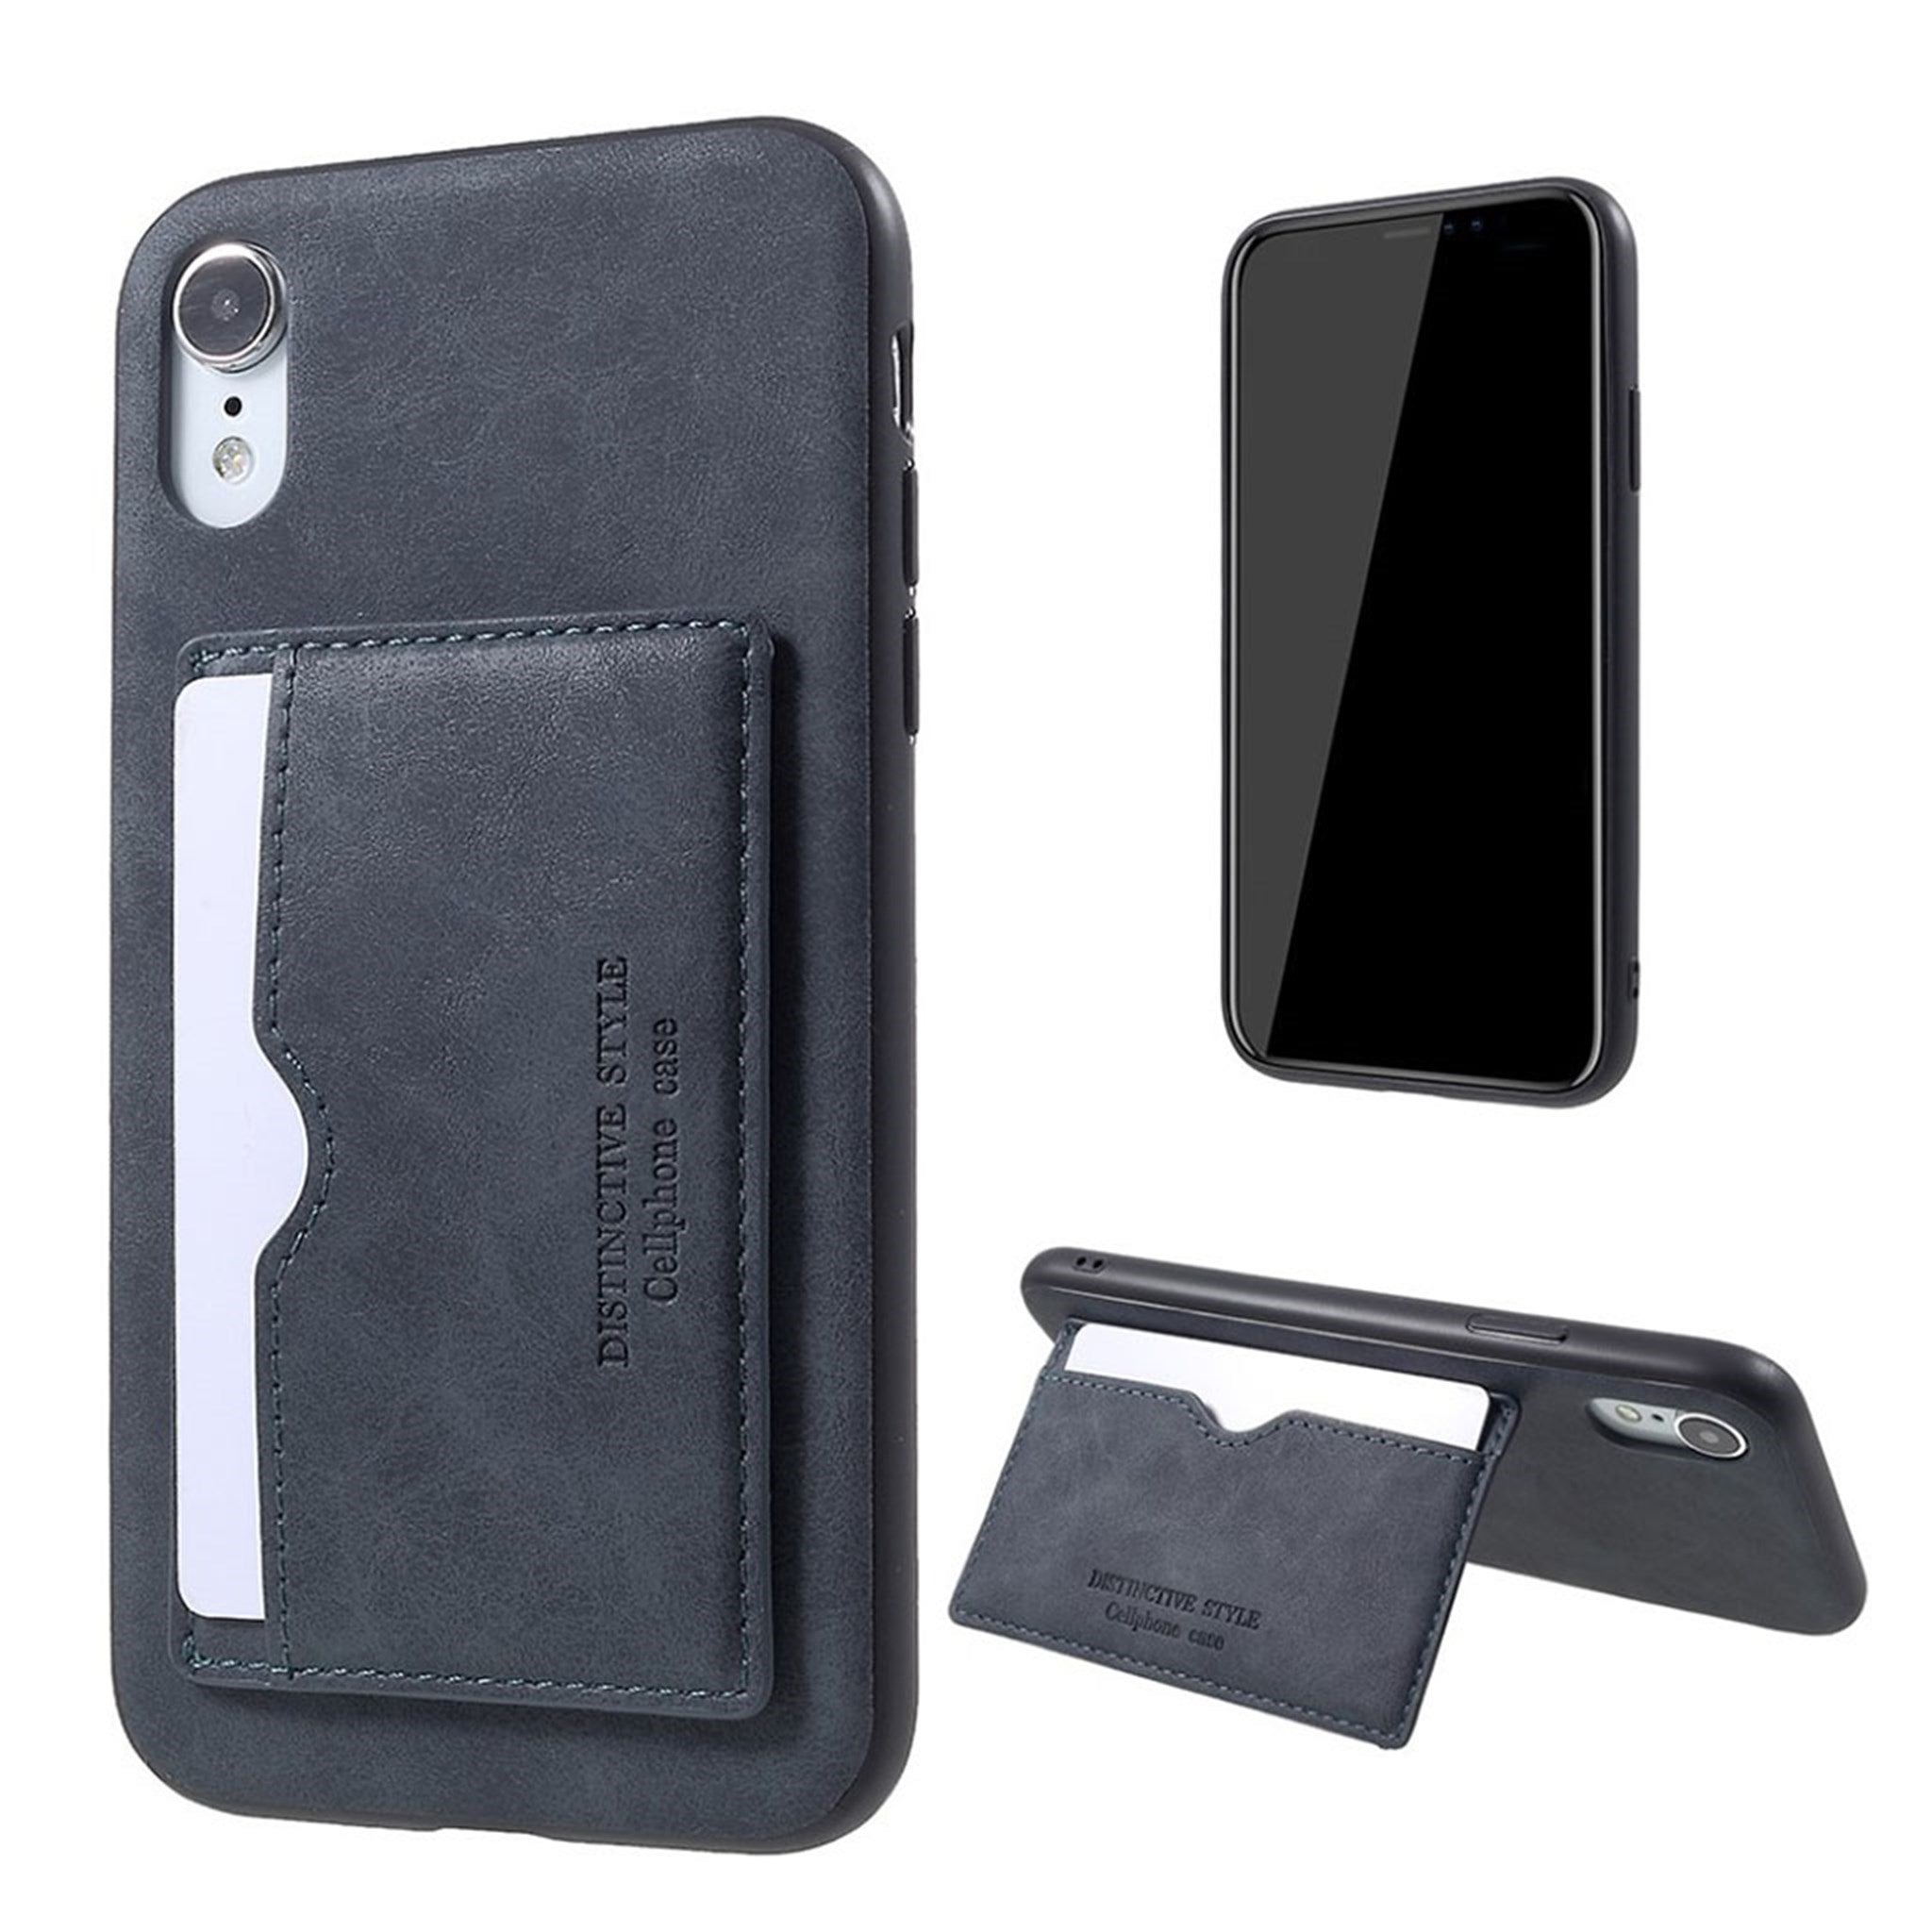 iPhone Xr kickstand leather coated case - Grey